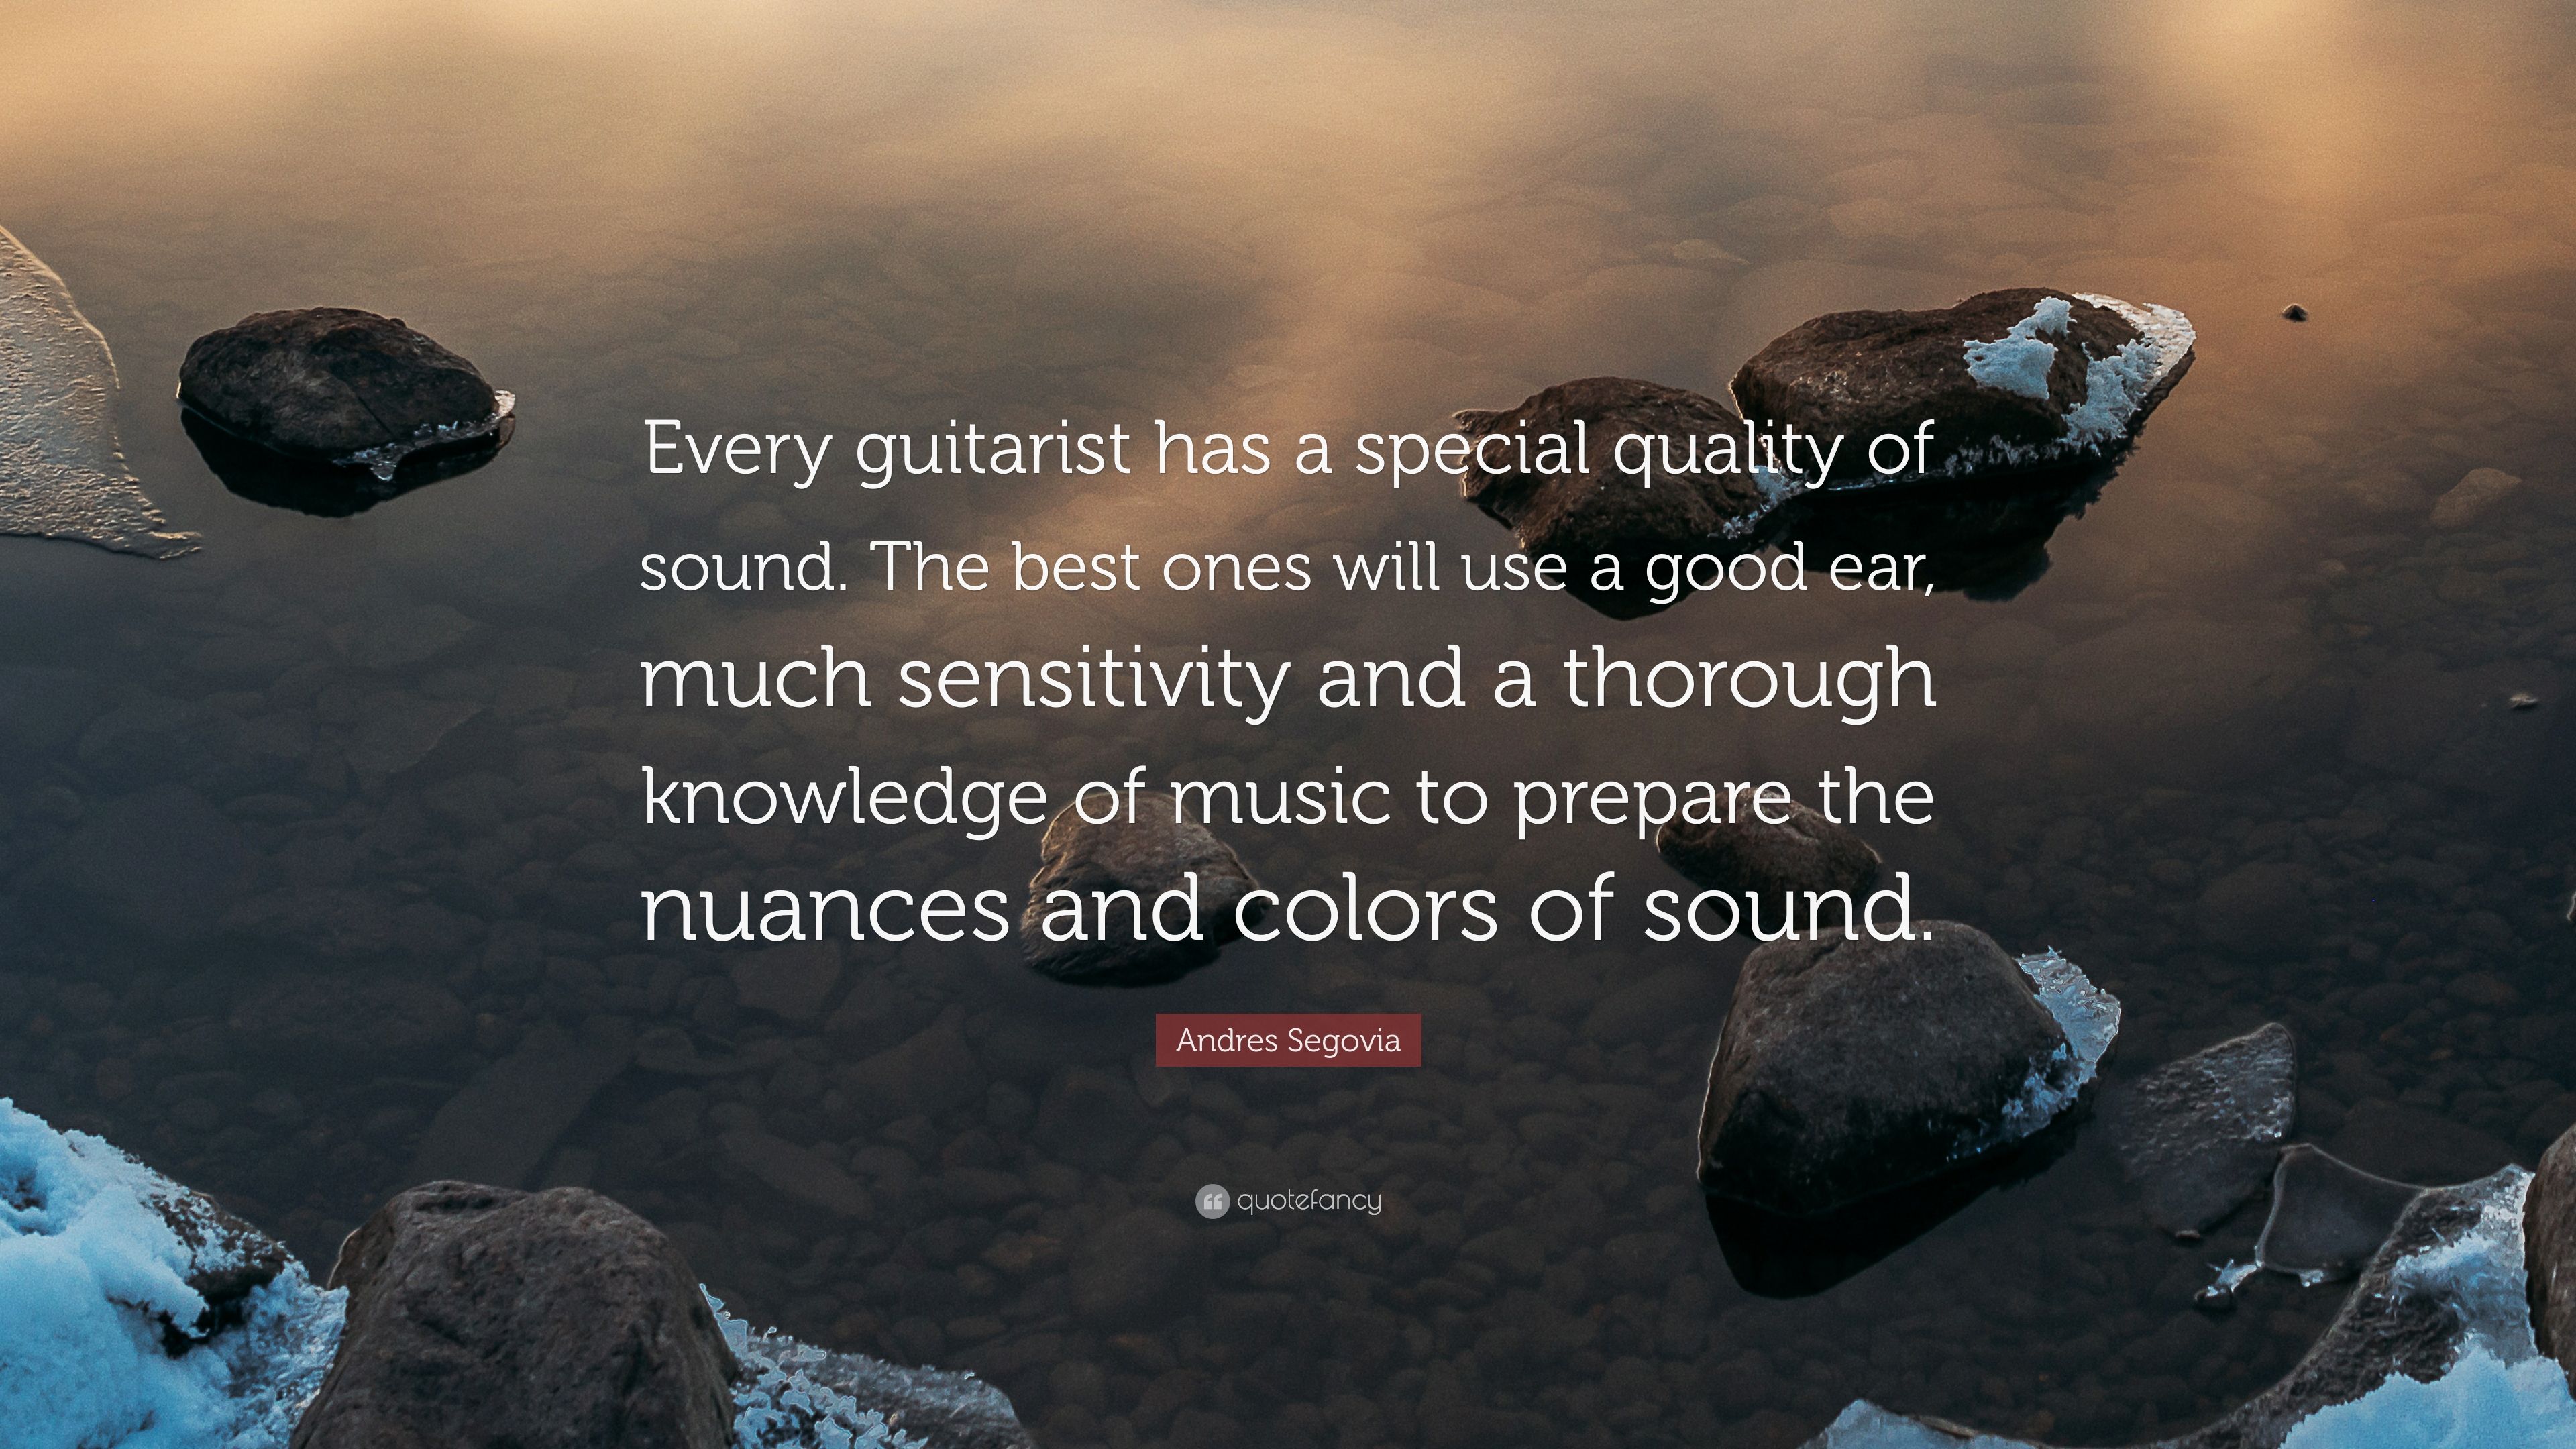 Andres segovia quote âevery guitarist has a special quality of sound the best ones will use a good ear much sensitivity and a thorough knowlâ